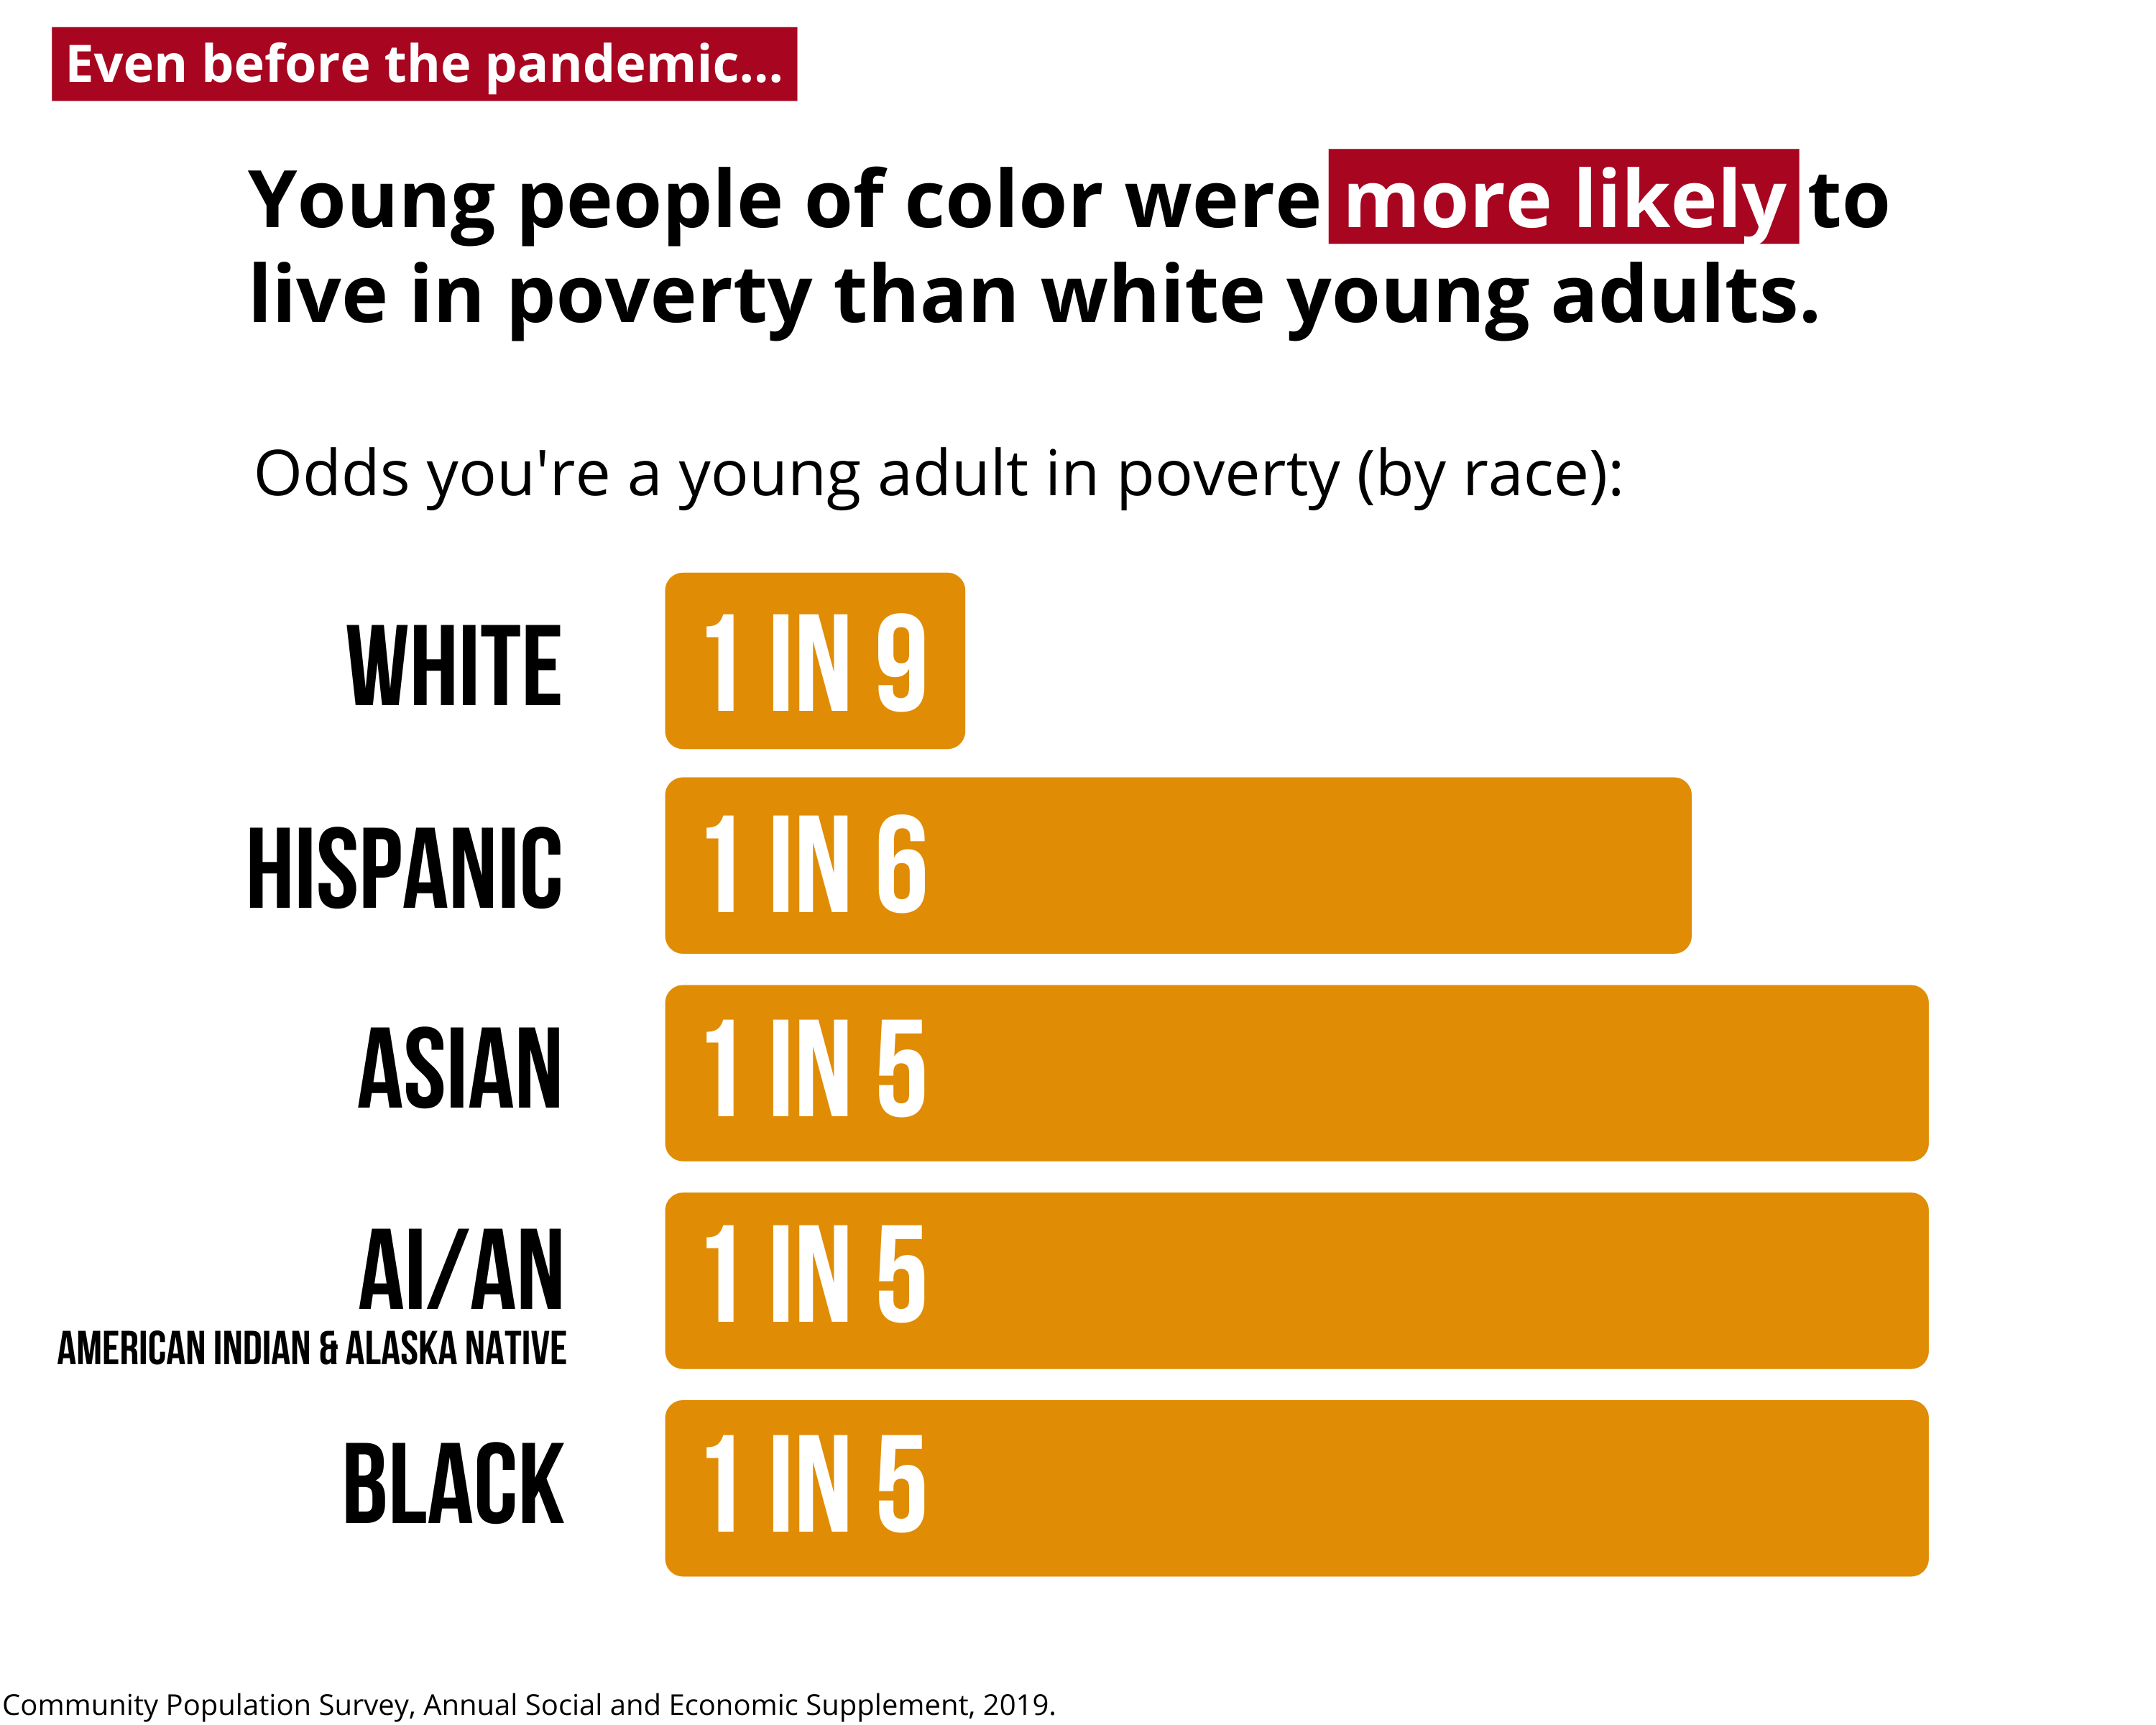 Young people of color were more likely to live in poverty than white young adults.